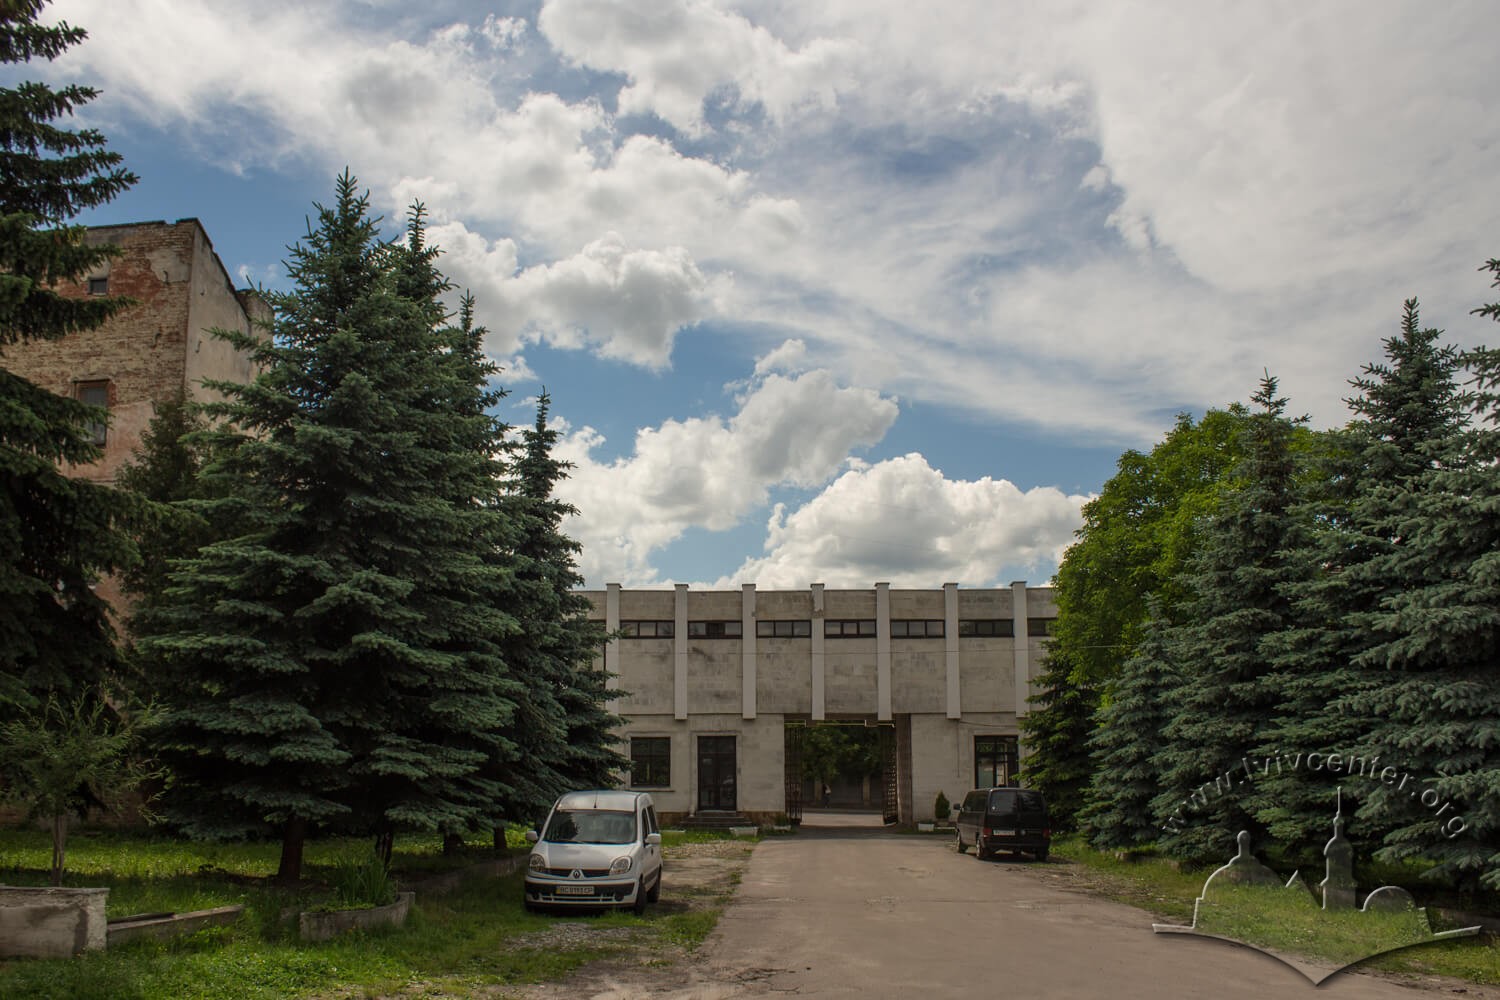 Vul. Volynska, 10. Alley on the territory of the former 